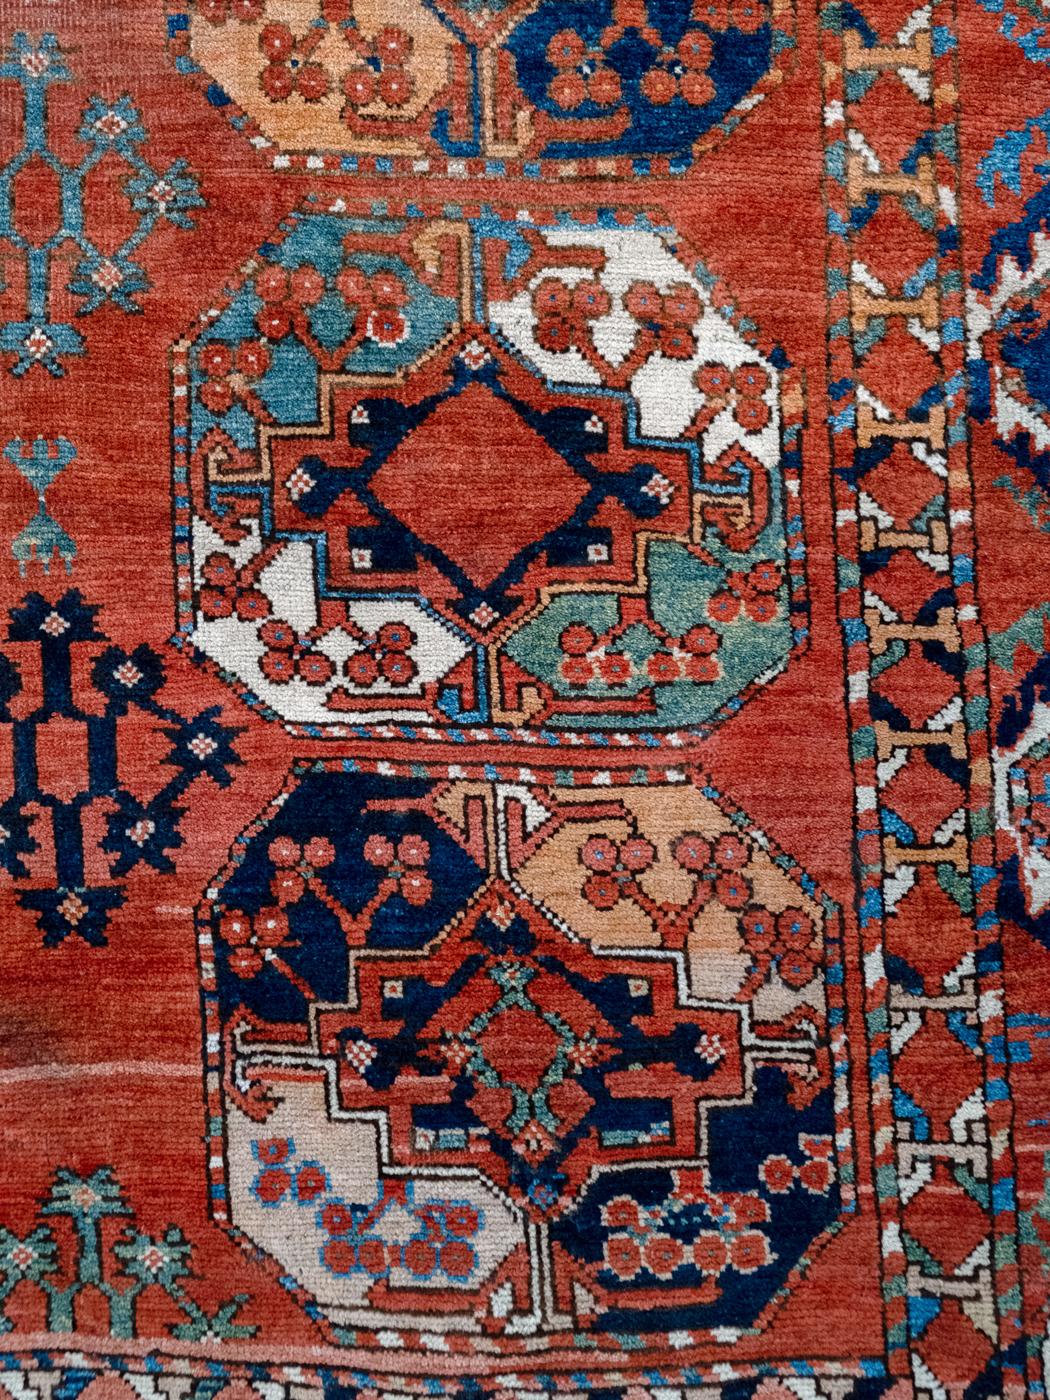 Hand-Knotted Bright and Brilliant Antique Persian Ersari Carpet, Wool, 7' x 9' In Good Condition For Sale In New York, NY